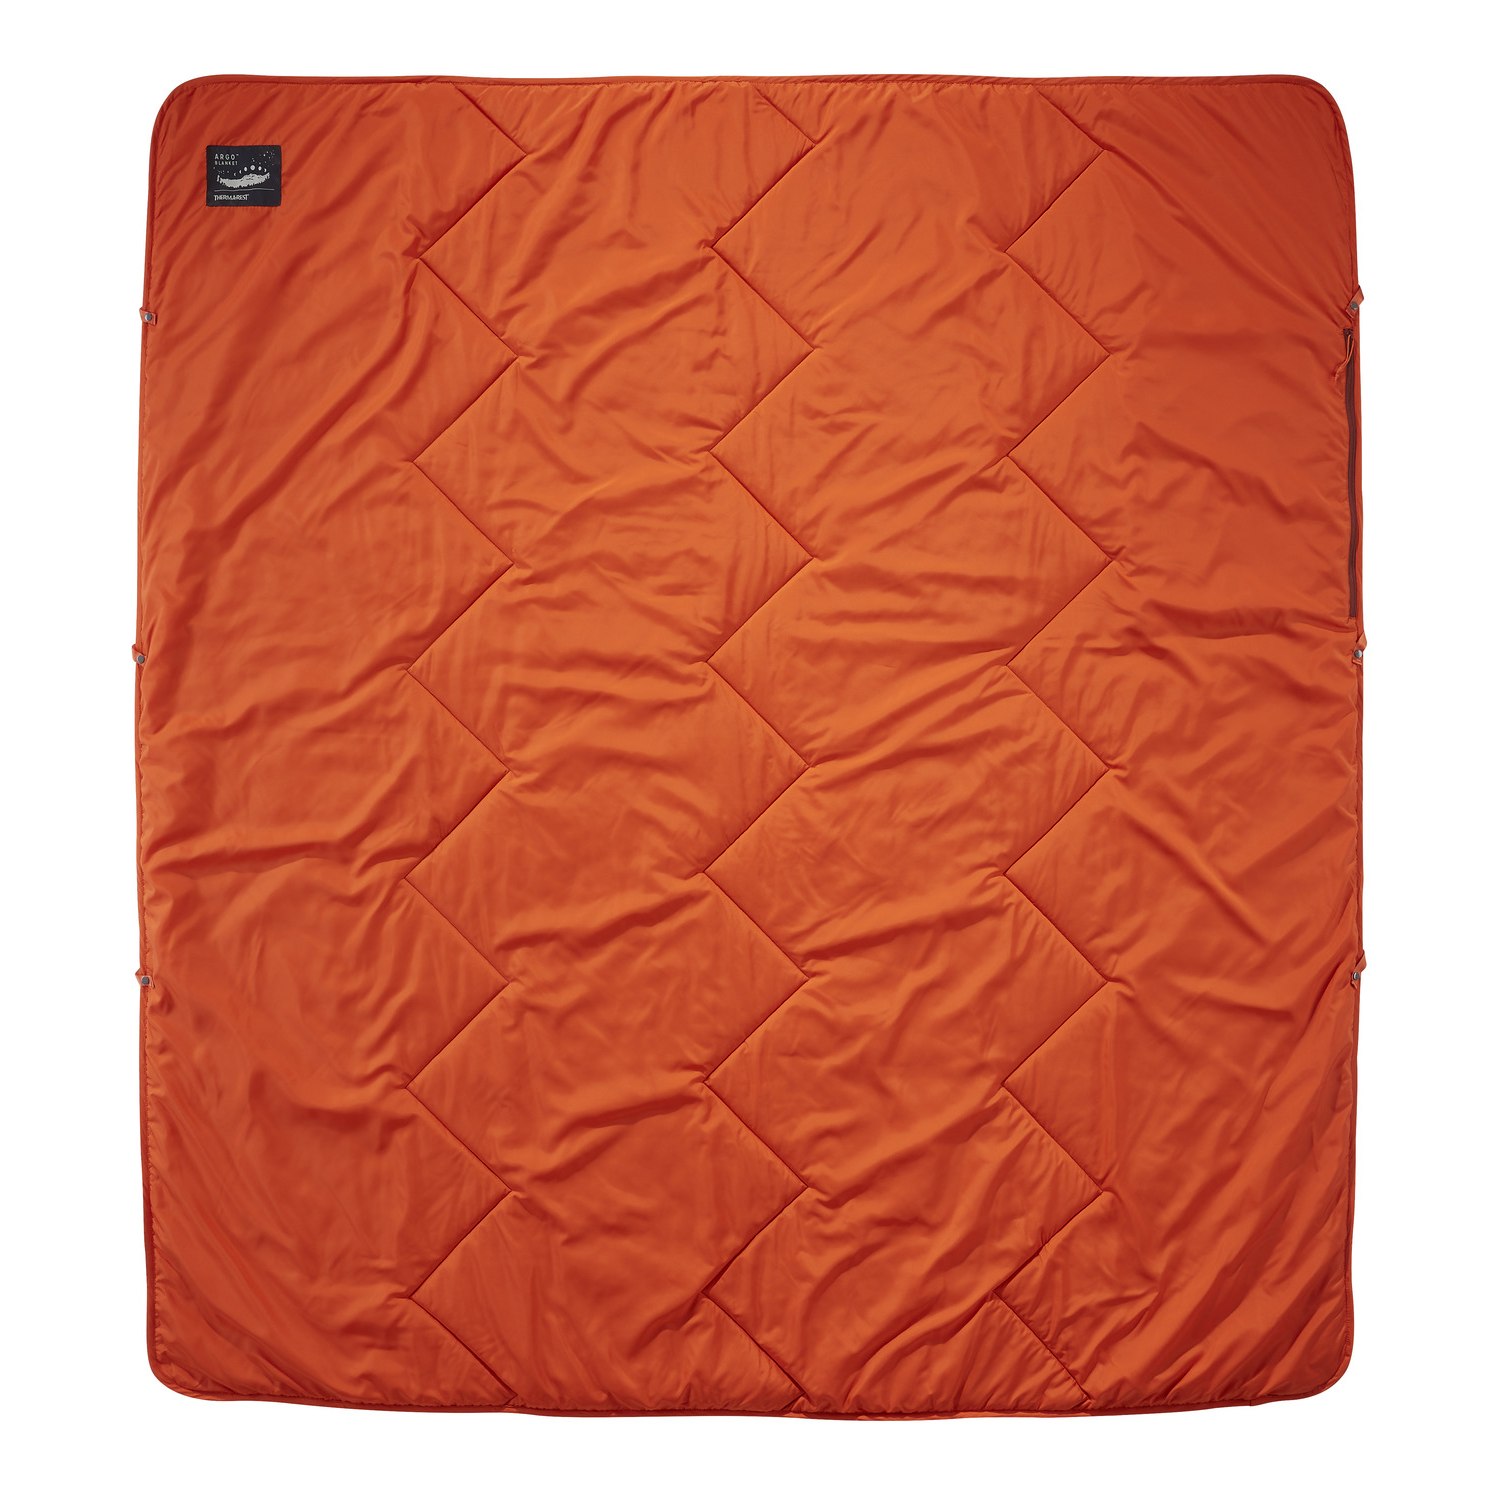 Picture of Therm-a-Rest Argo Blanket - Tomato